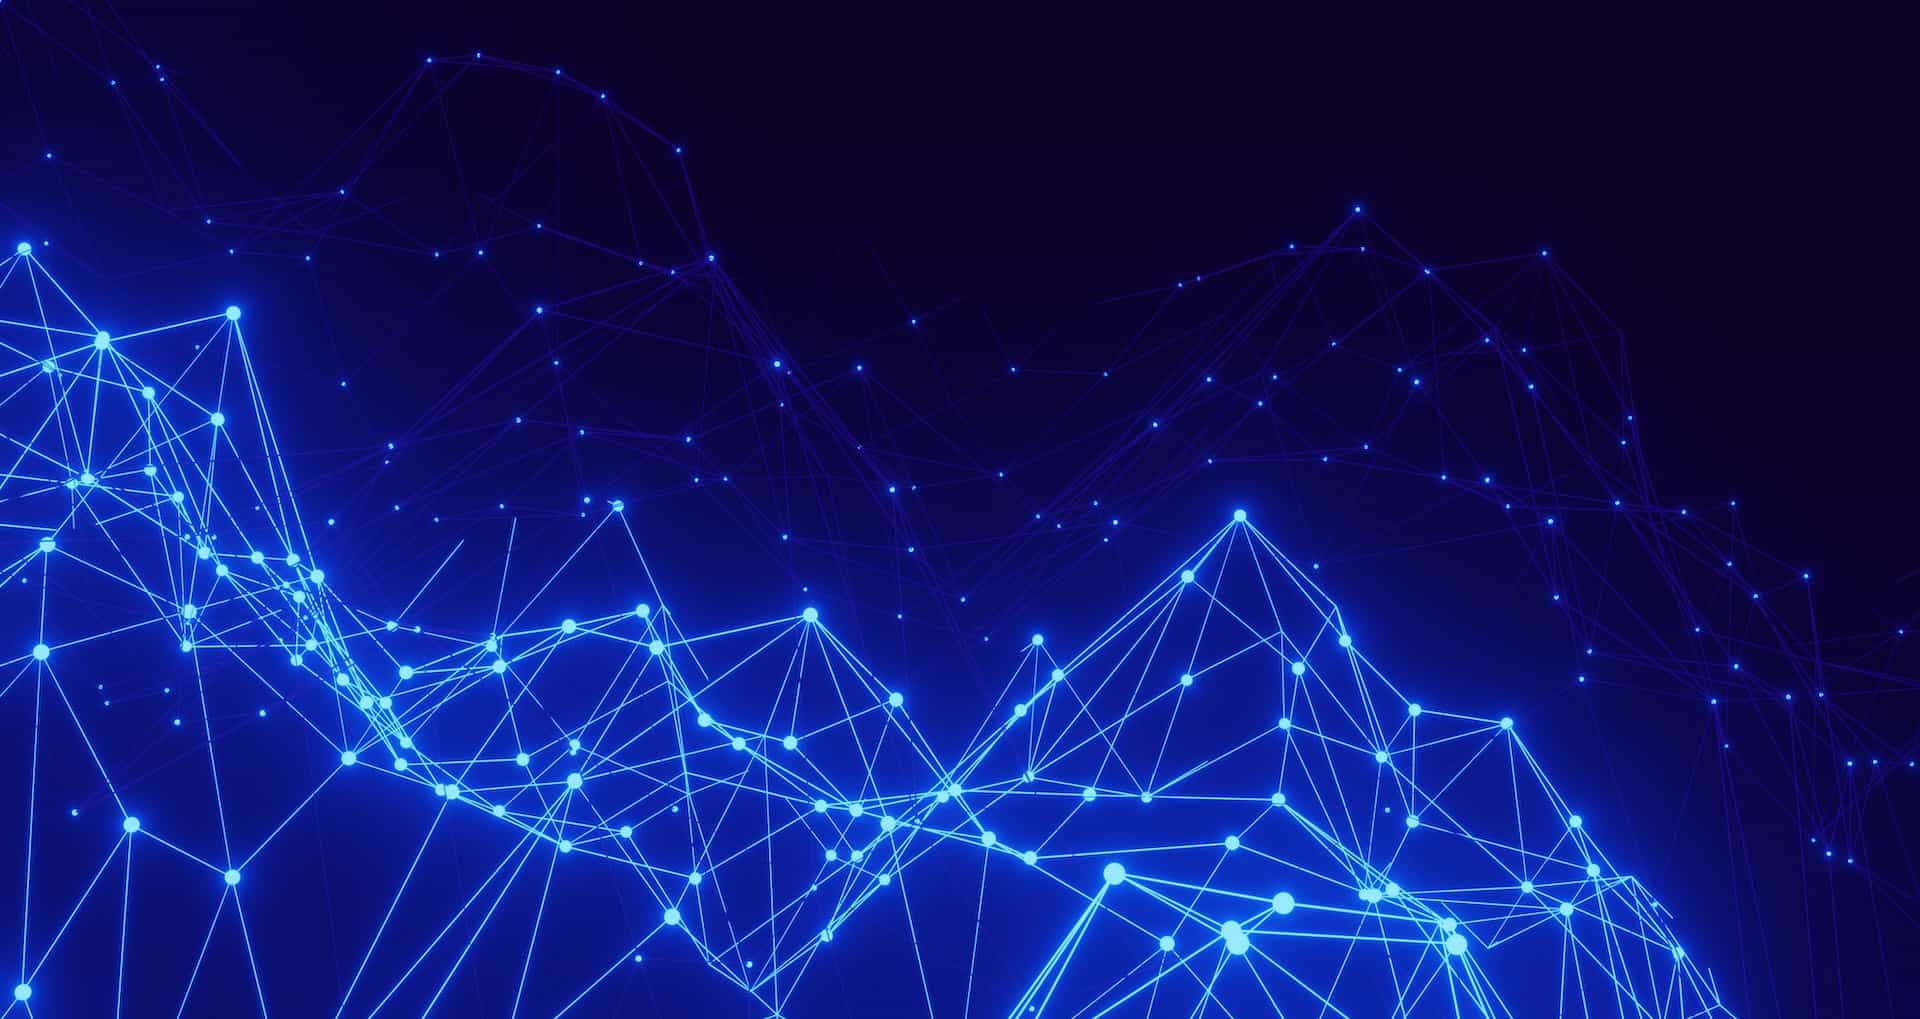 Abstract blue lights and lines on back background, representing a network